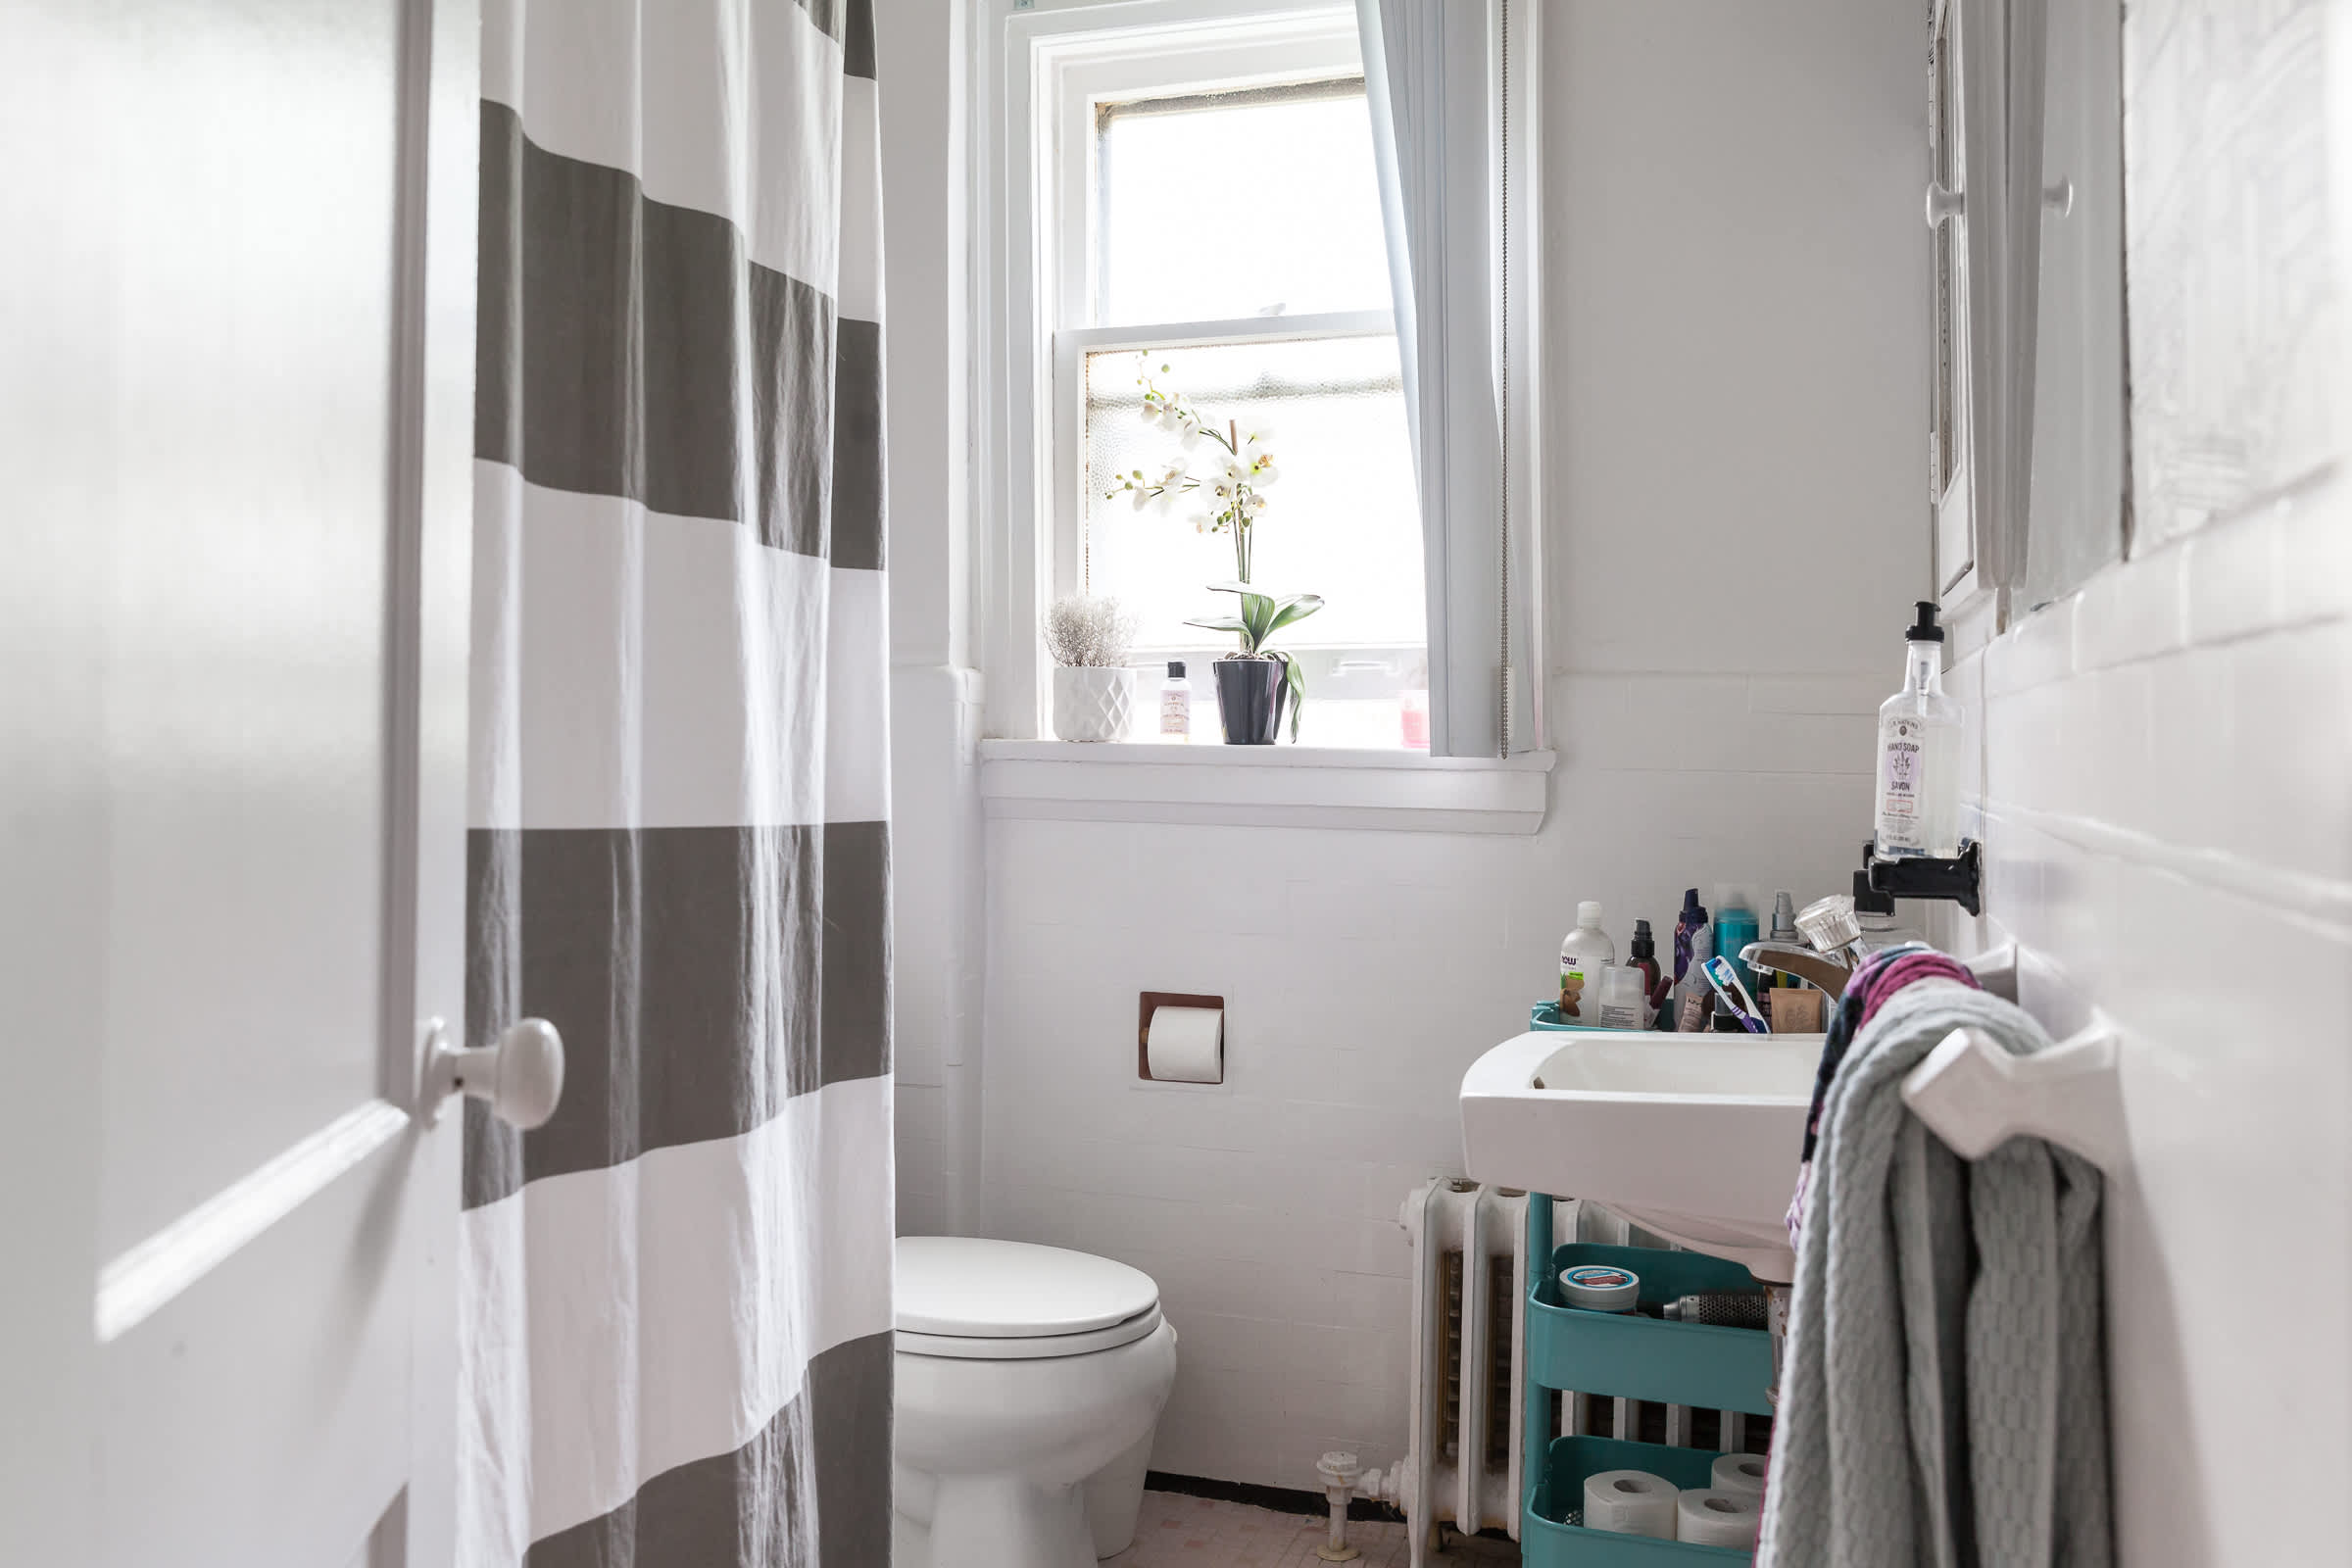 How To…Get Rid of Bleach Stains in the Bathroom